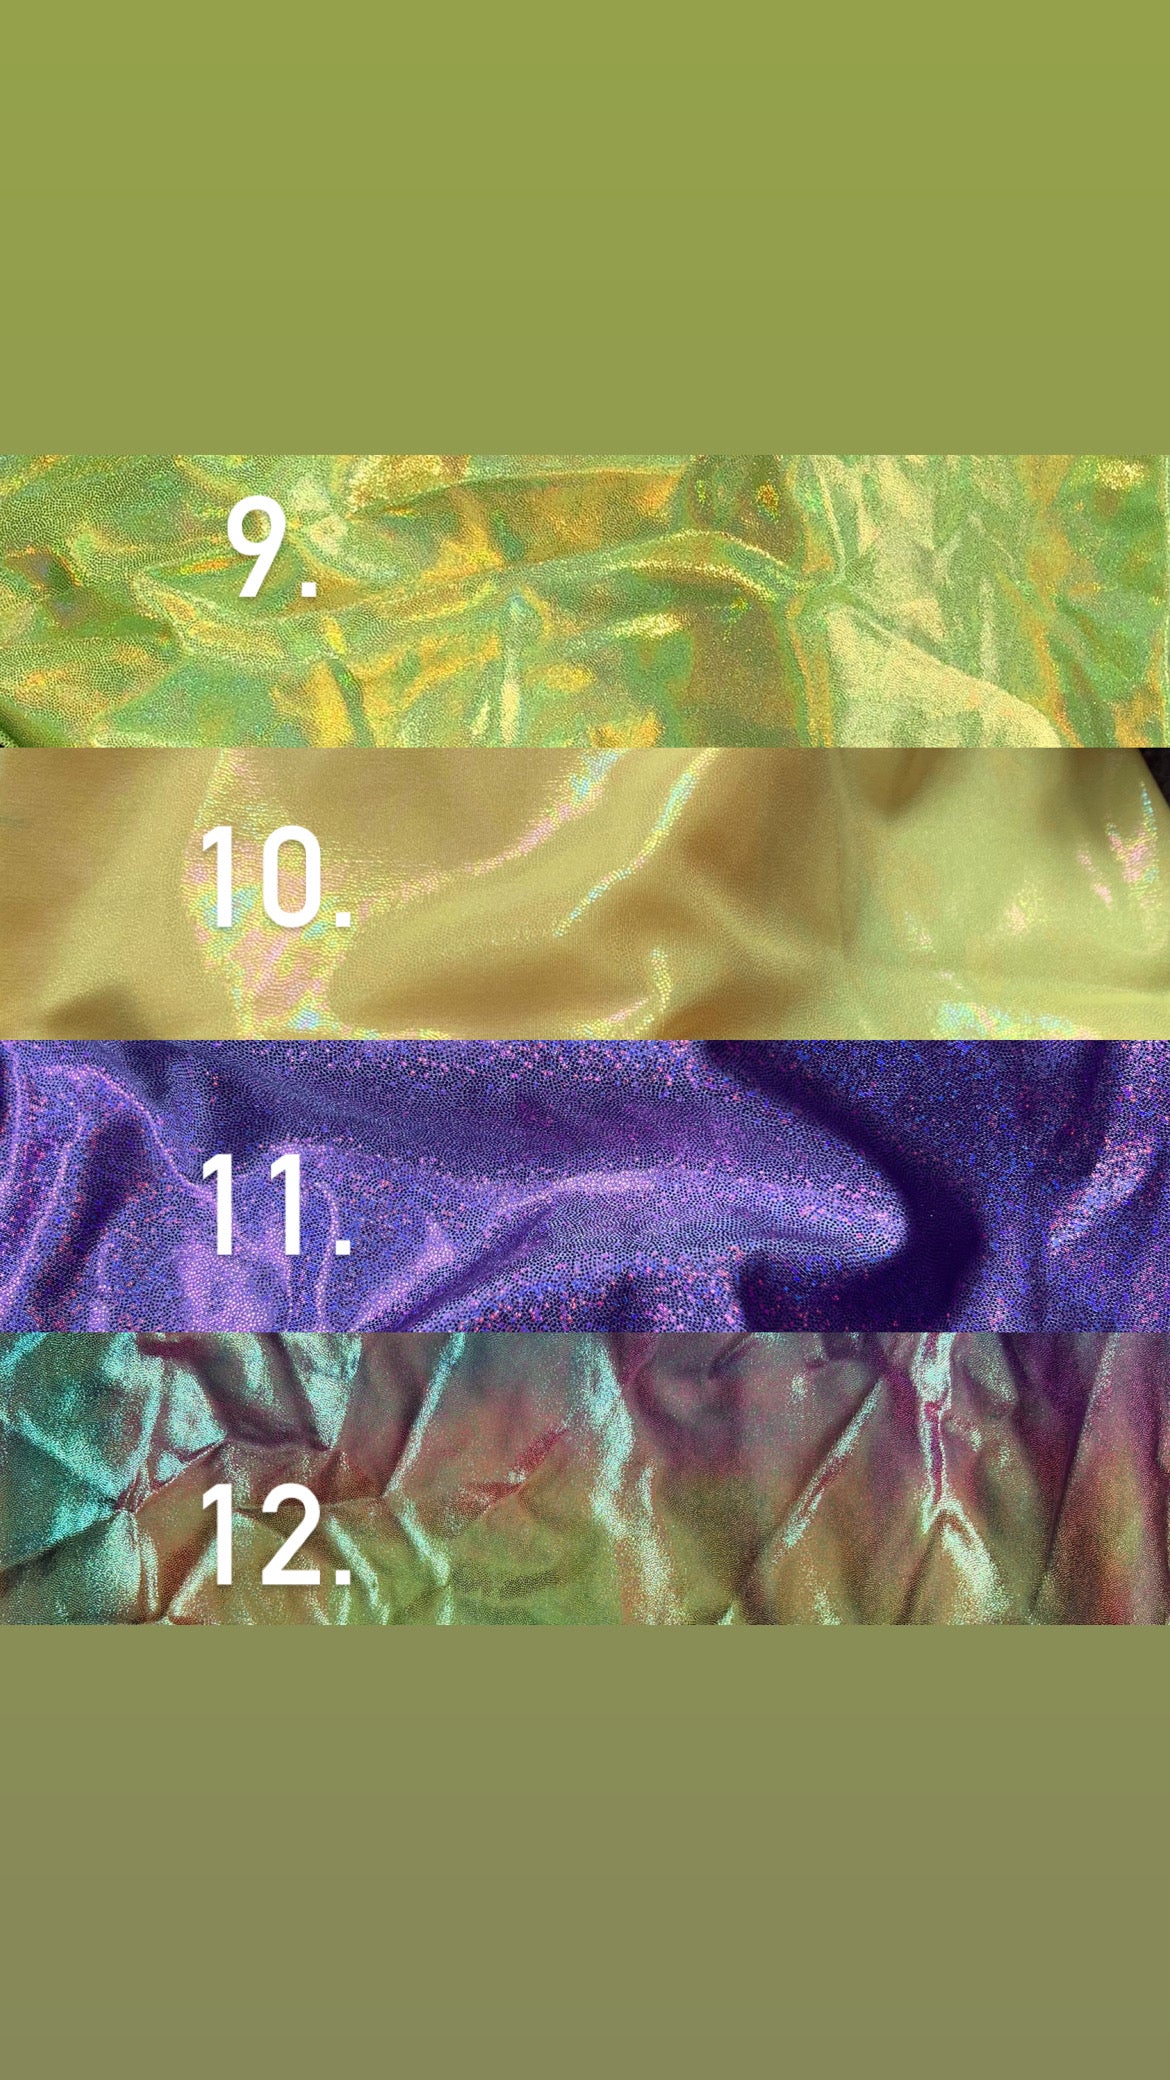 Holographic Thigh High Rave Bottoms - AVAILABLE IN MORE STYLES AND COLORS